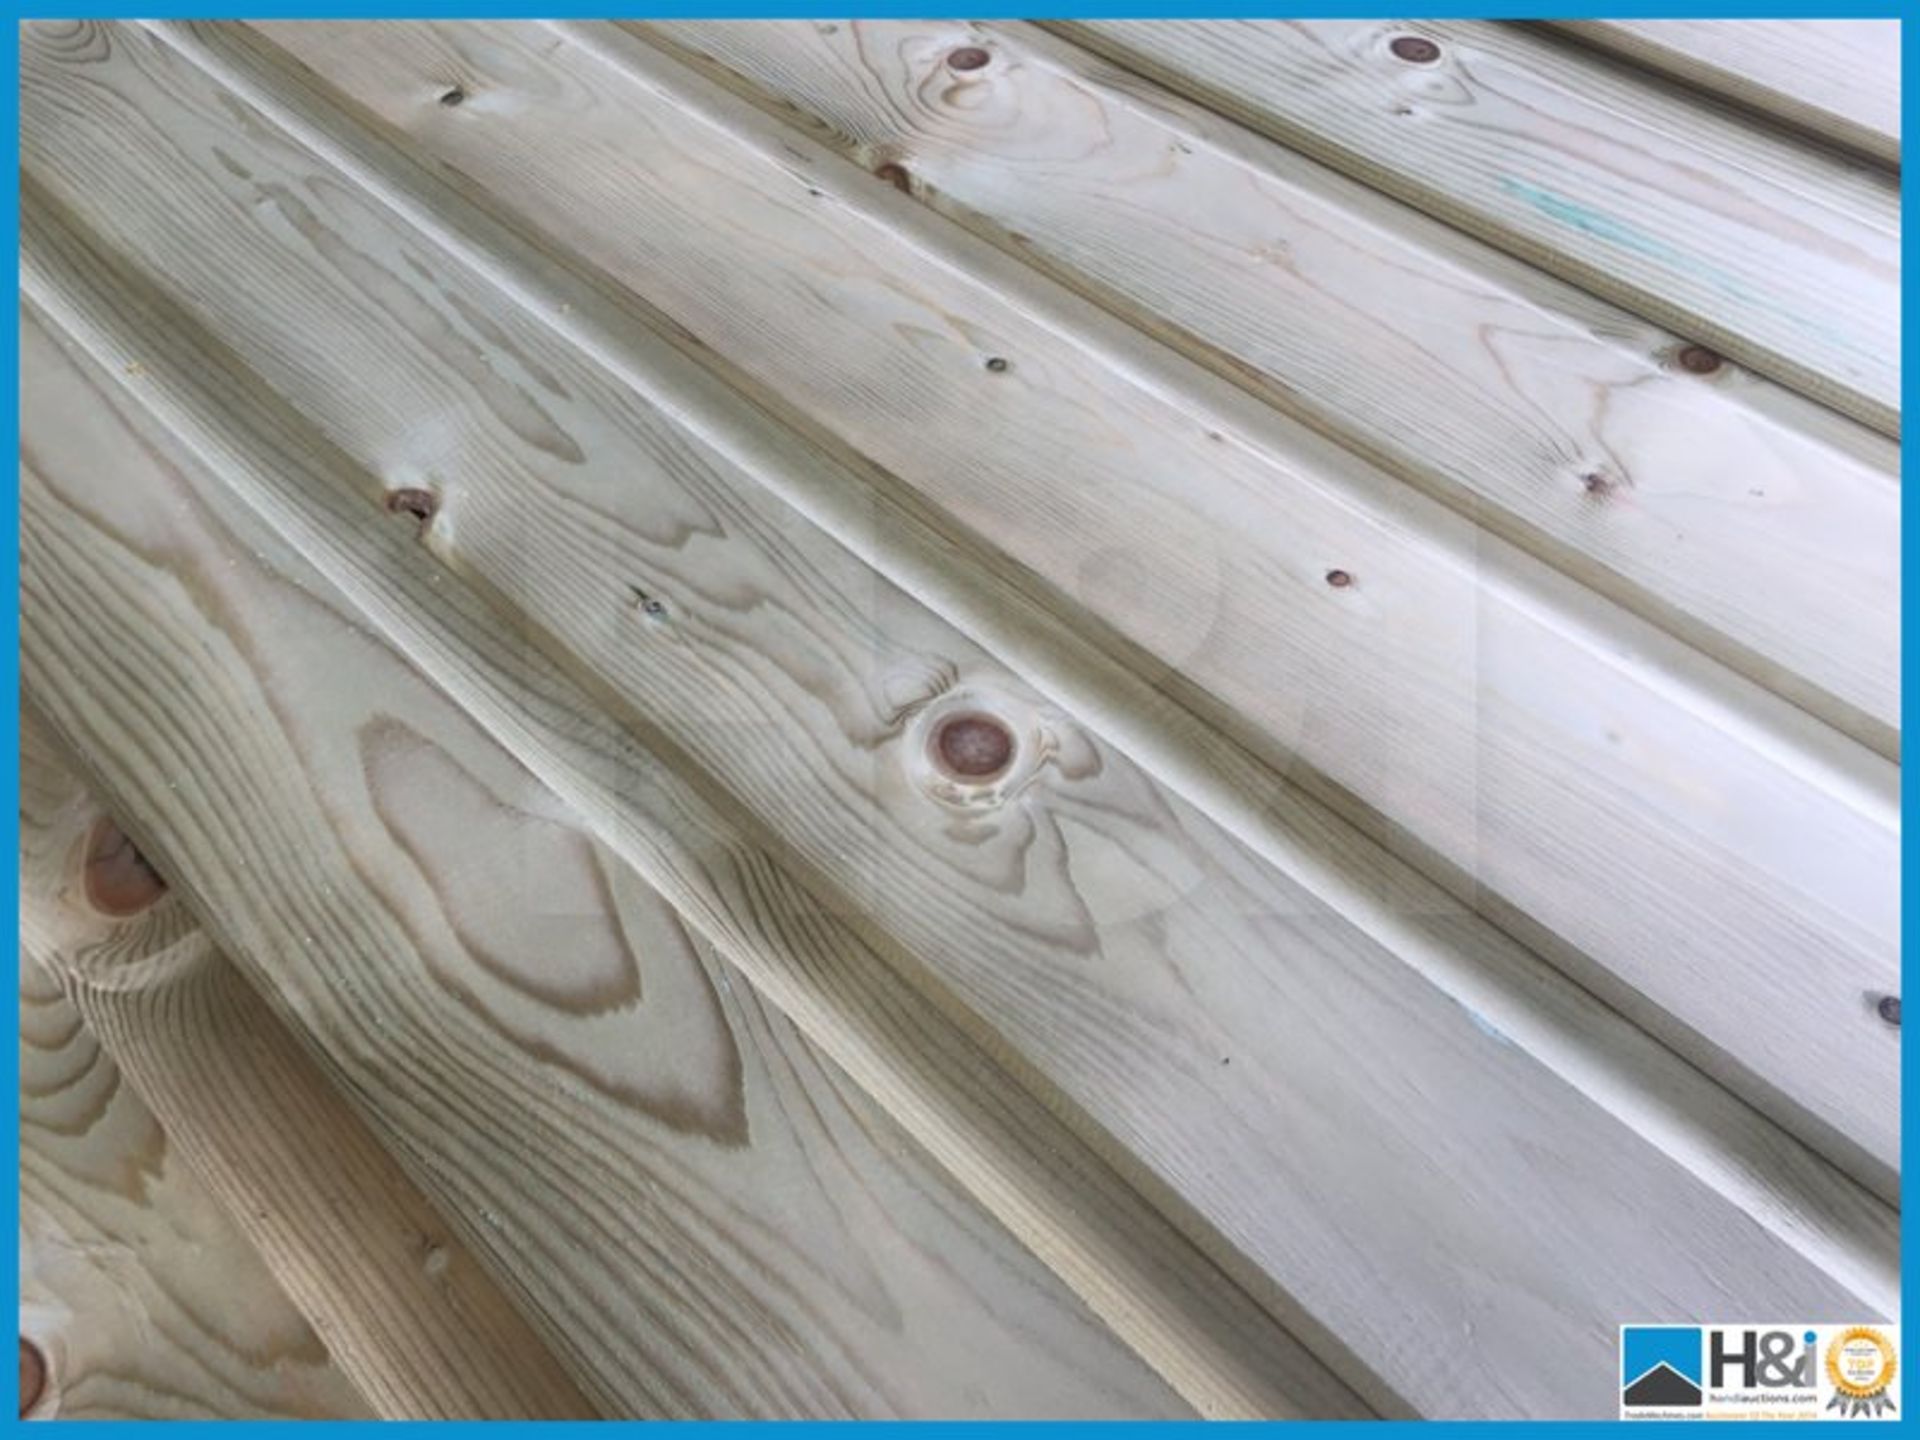 60 LENGTHS OF TOP QUALITY TANALISED 19x125 REDWOOD OVERLAP SHIPLAP PROFILE TIMBER CLADDING IN 3.6 - Image 4 of 7